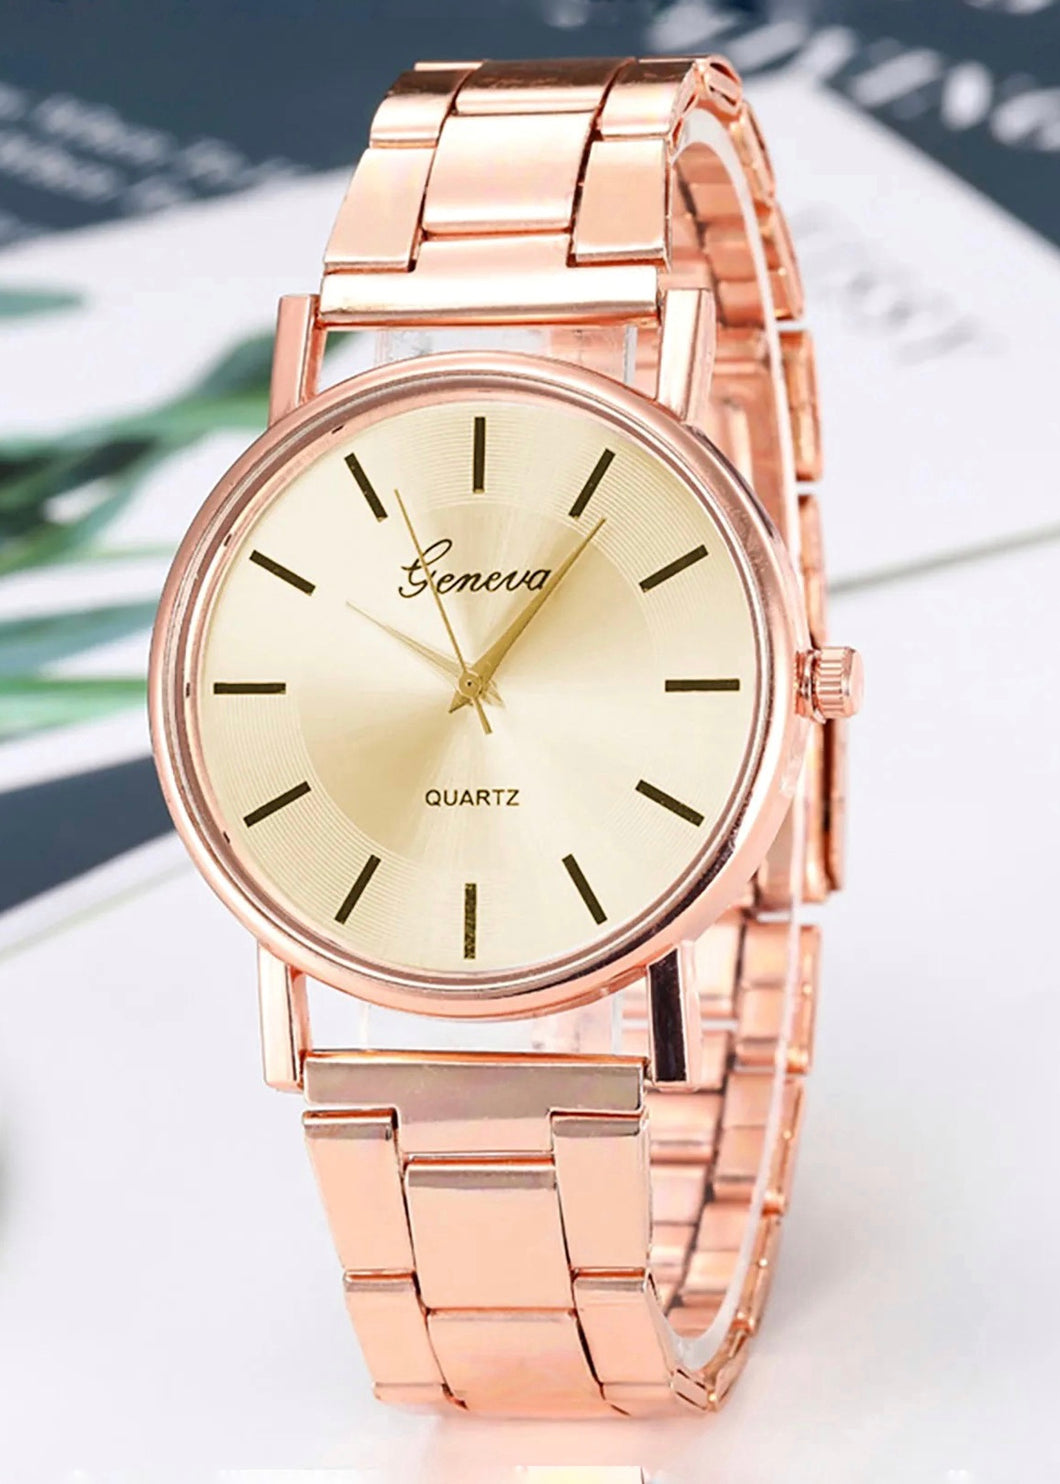 Rose Gold Watch - The Style Guide TT